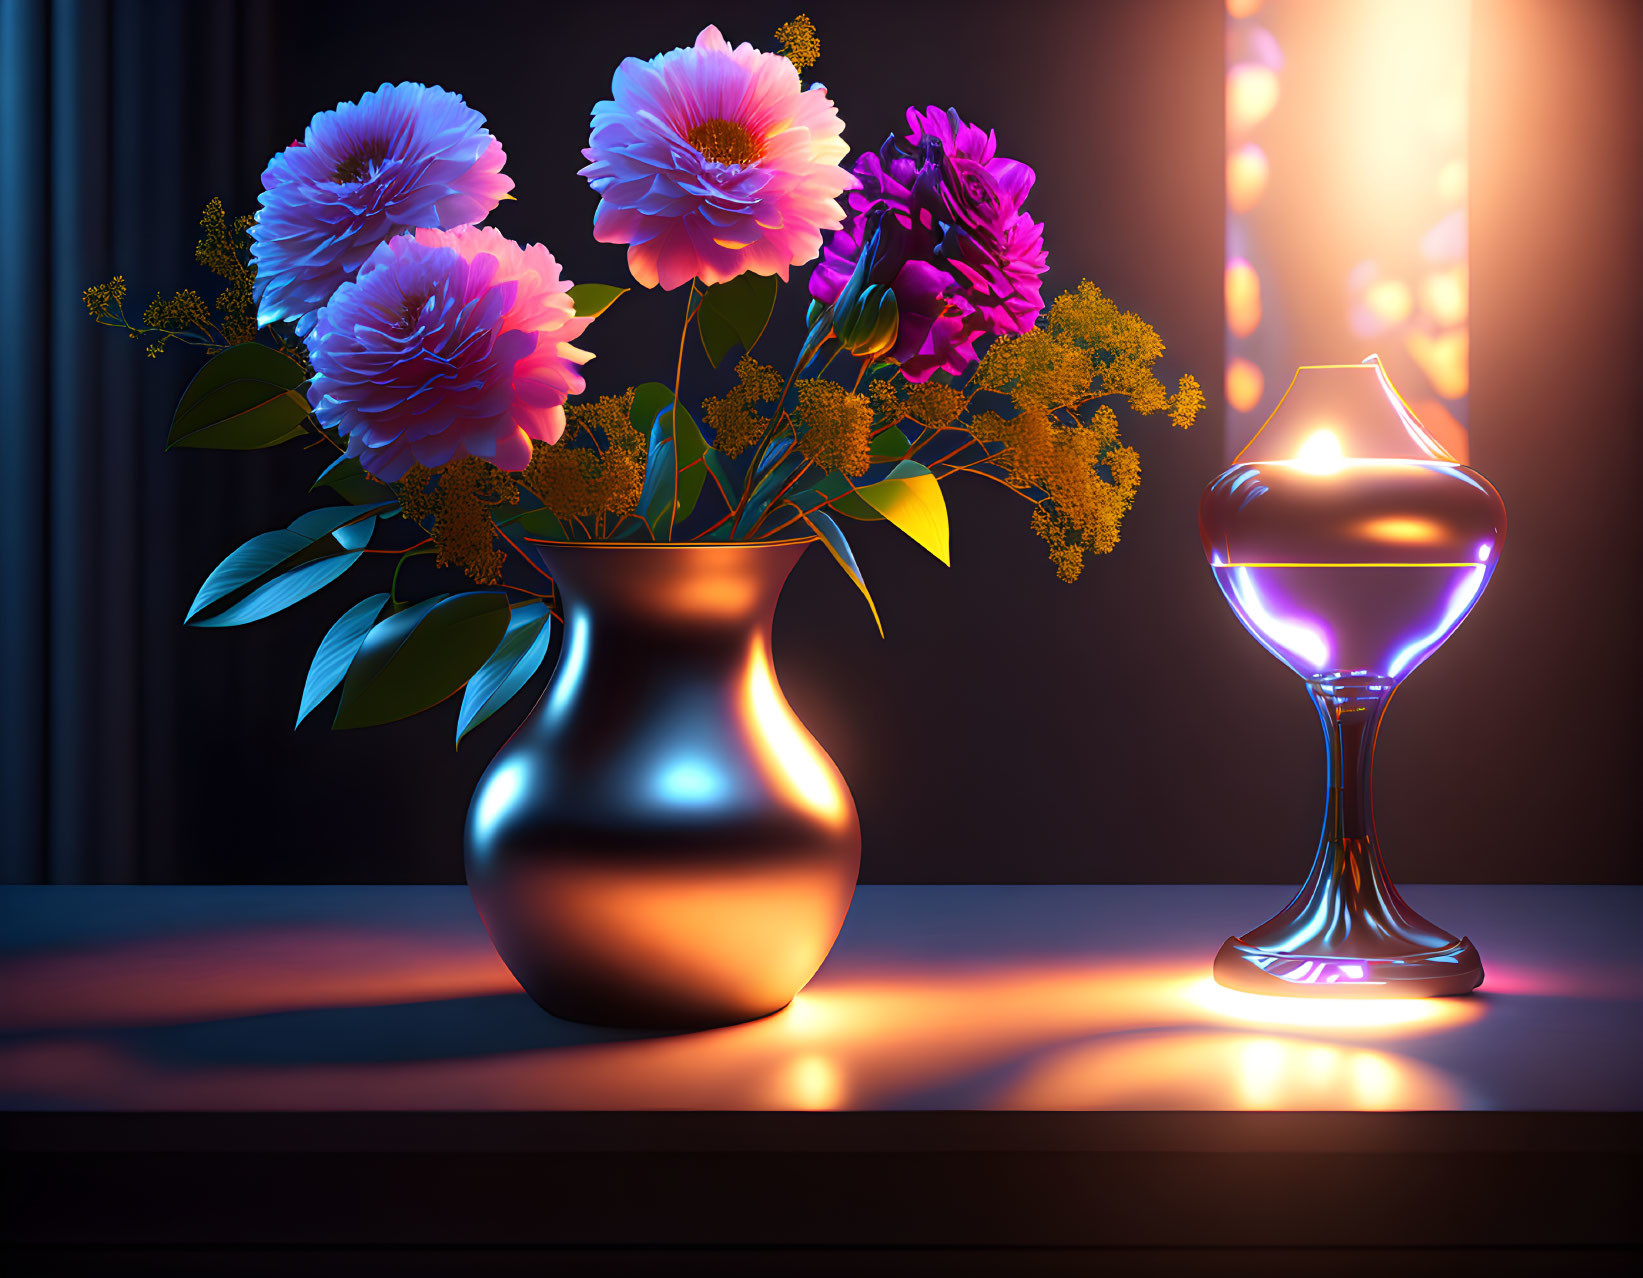 Colorful Flower Bouquet in Bronze Vase with Wine Glass and Ambient Lighting